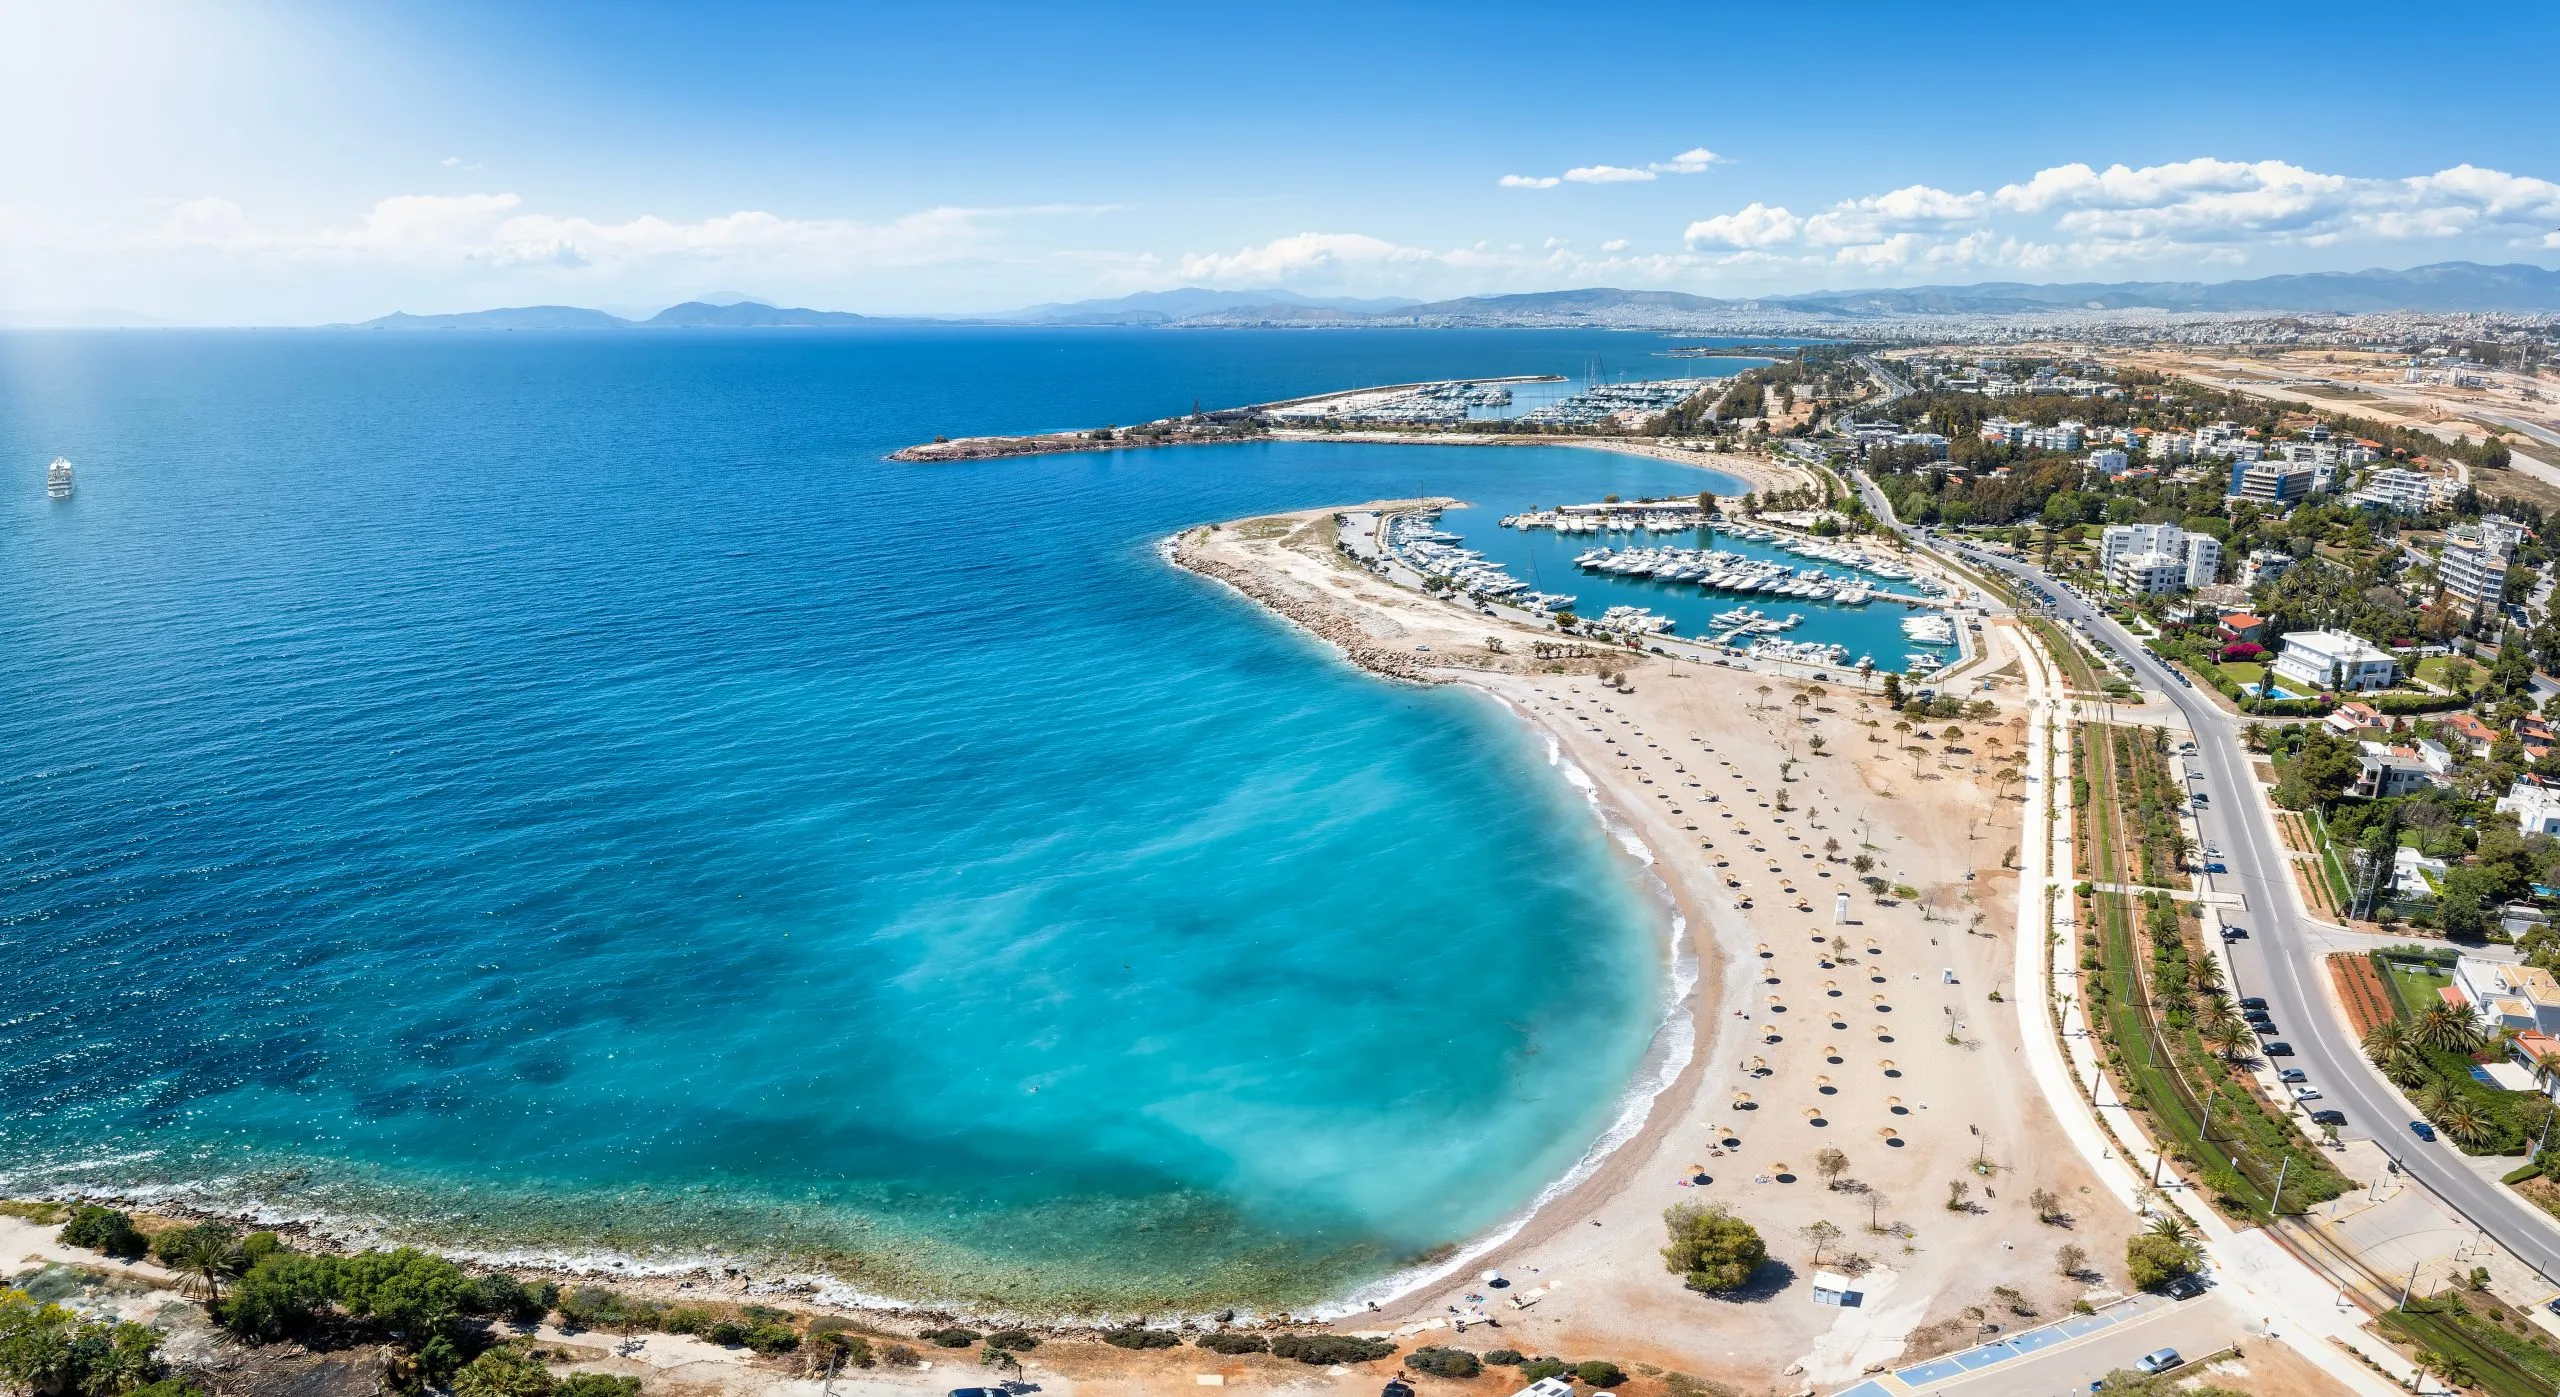 Aerial view of the popular Glyfada coast, south Athens suburb, Greece, with beaches, marinas and turquoise sea